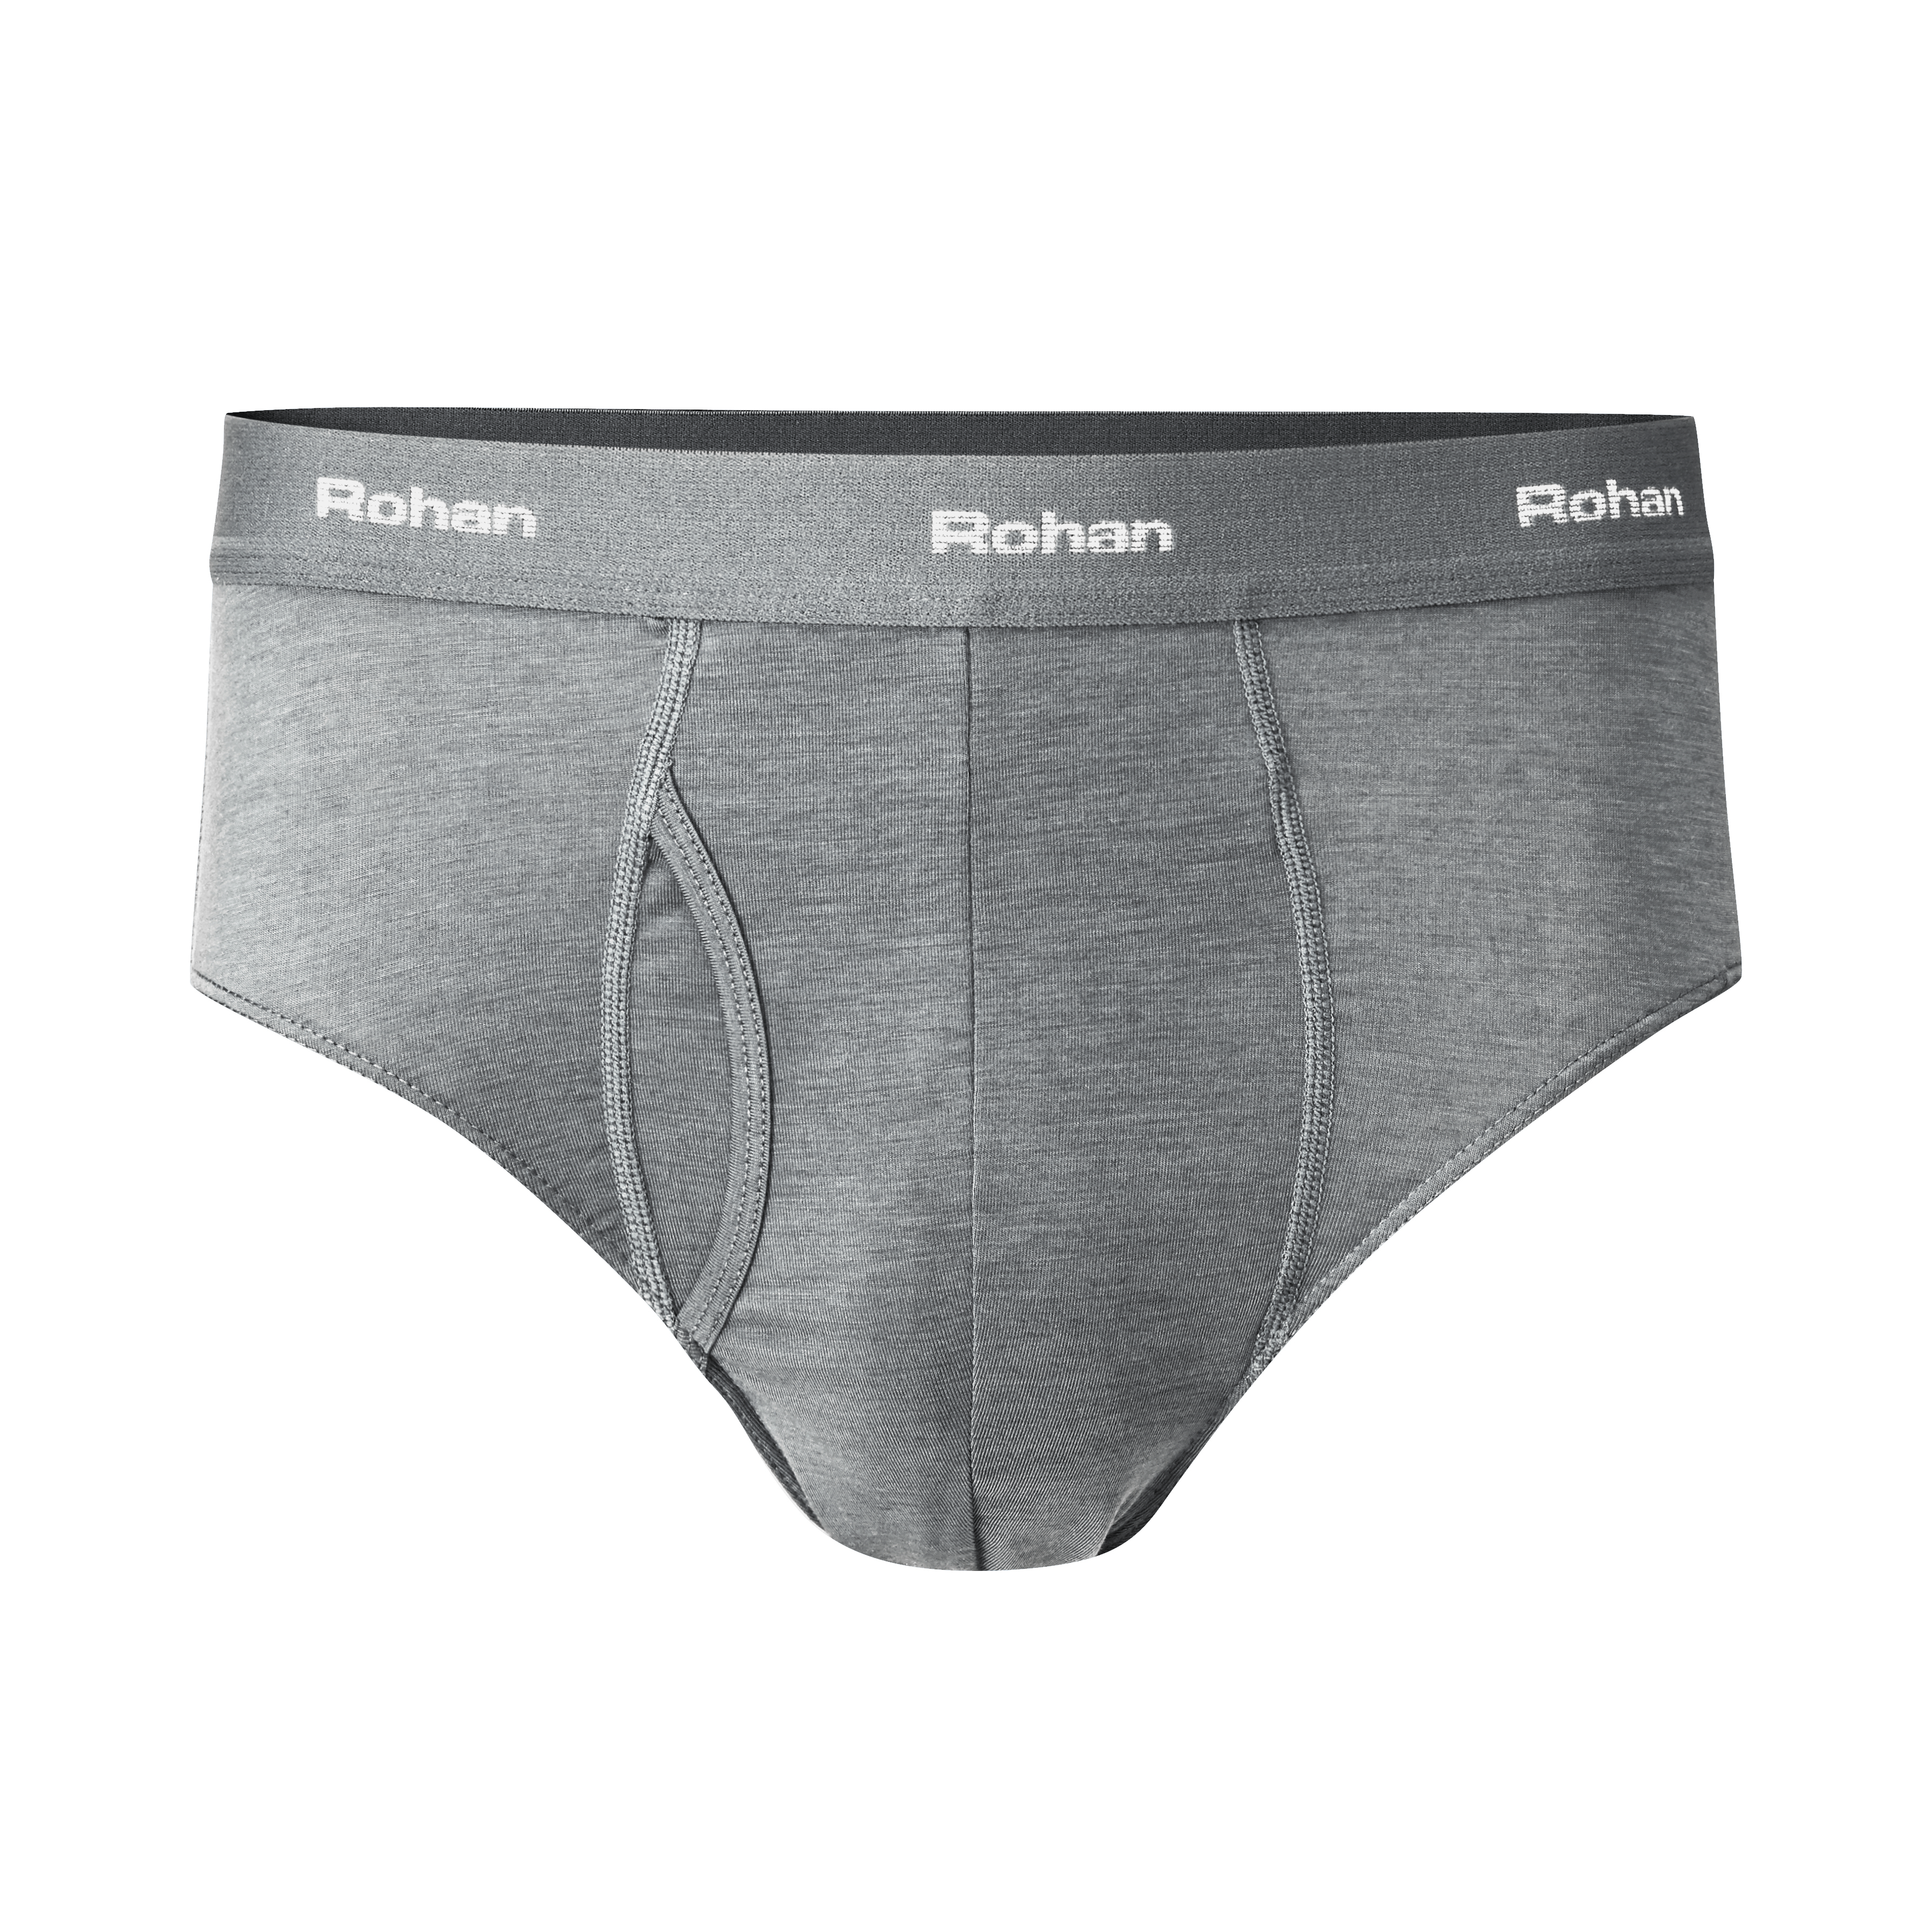 Men’s Aether Briefs with Fly Opening